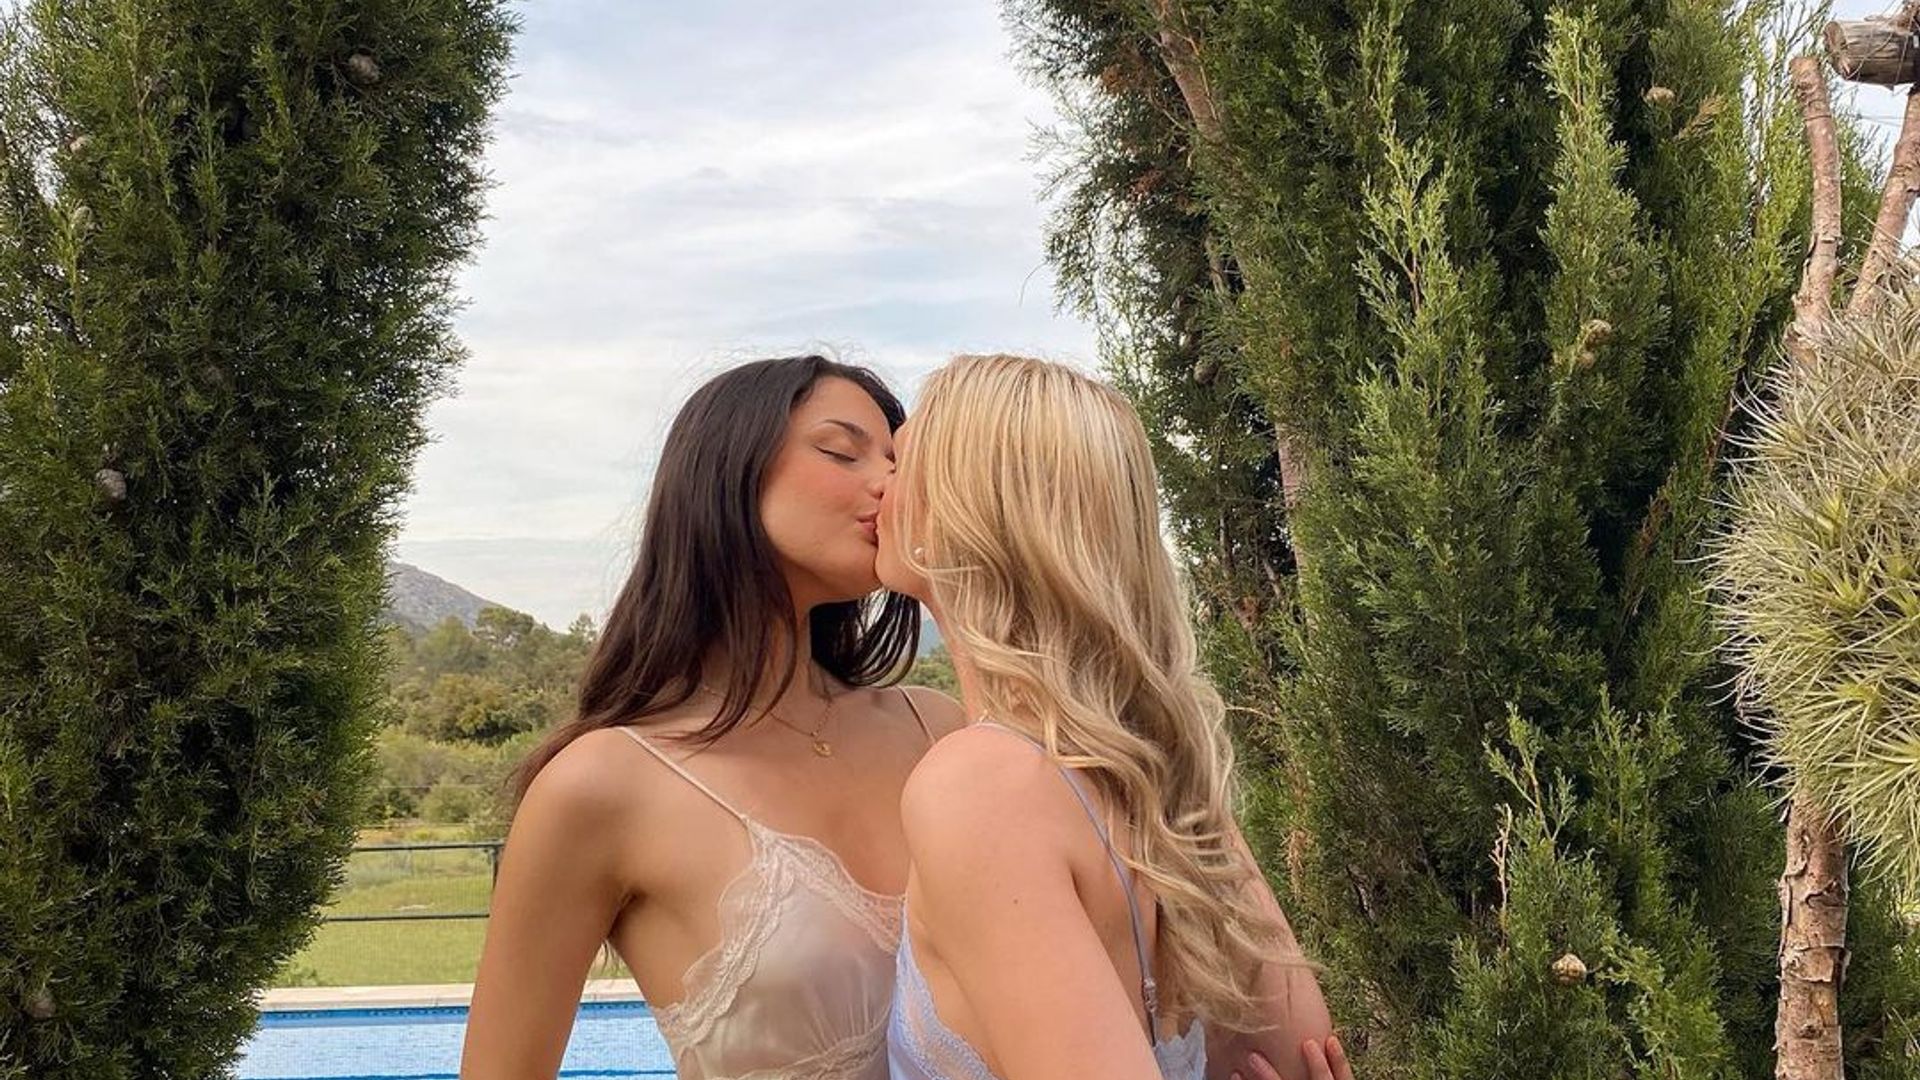 Eden and Emily kissing in front of conifer trees